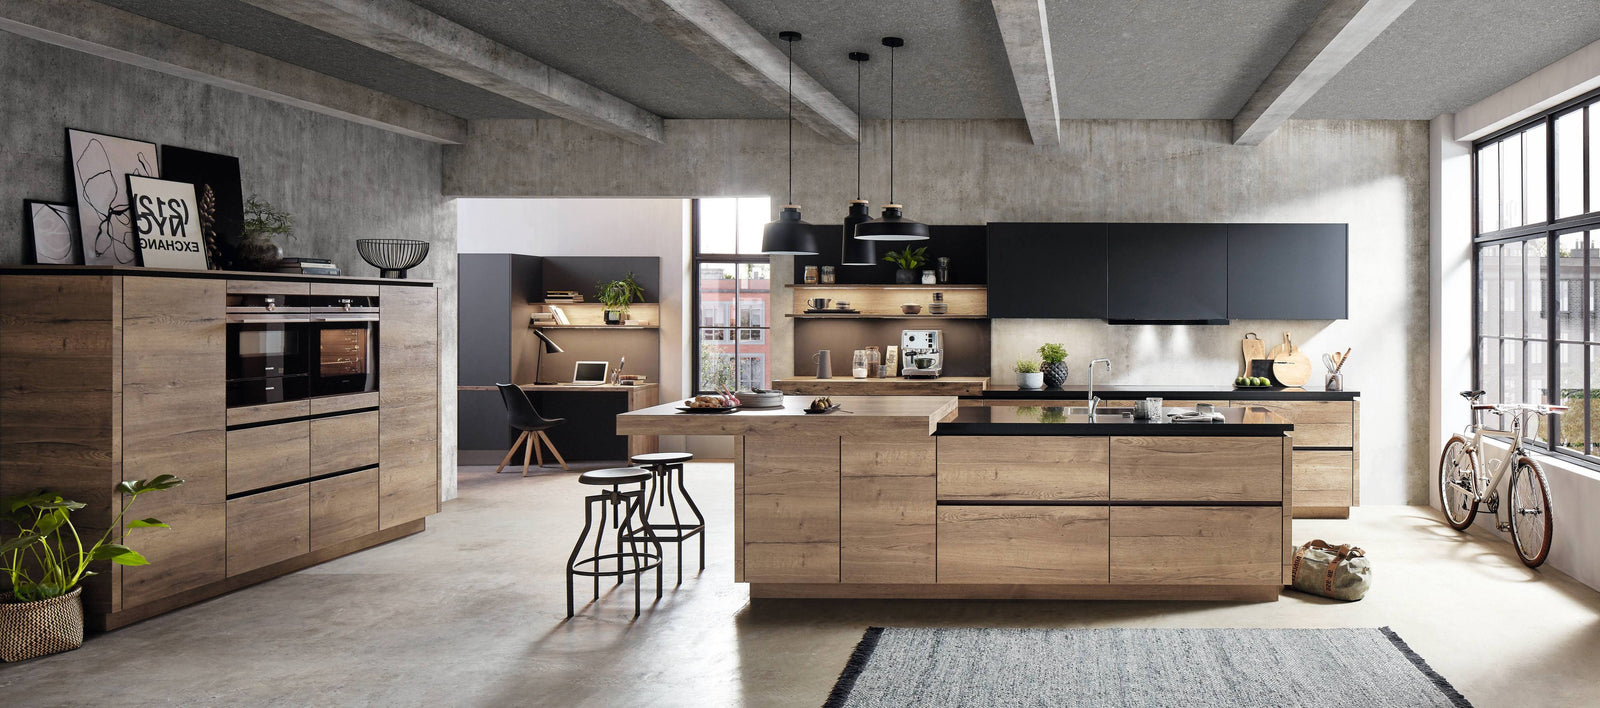 Industrial style kitchens are absolutely trendy 